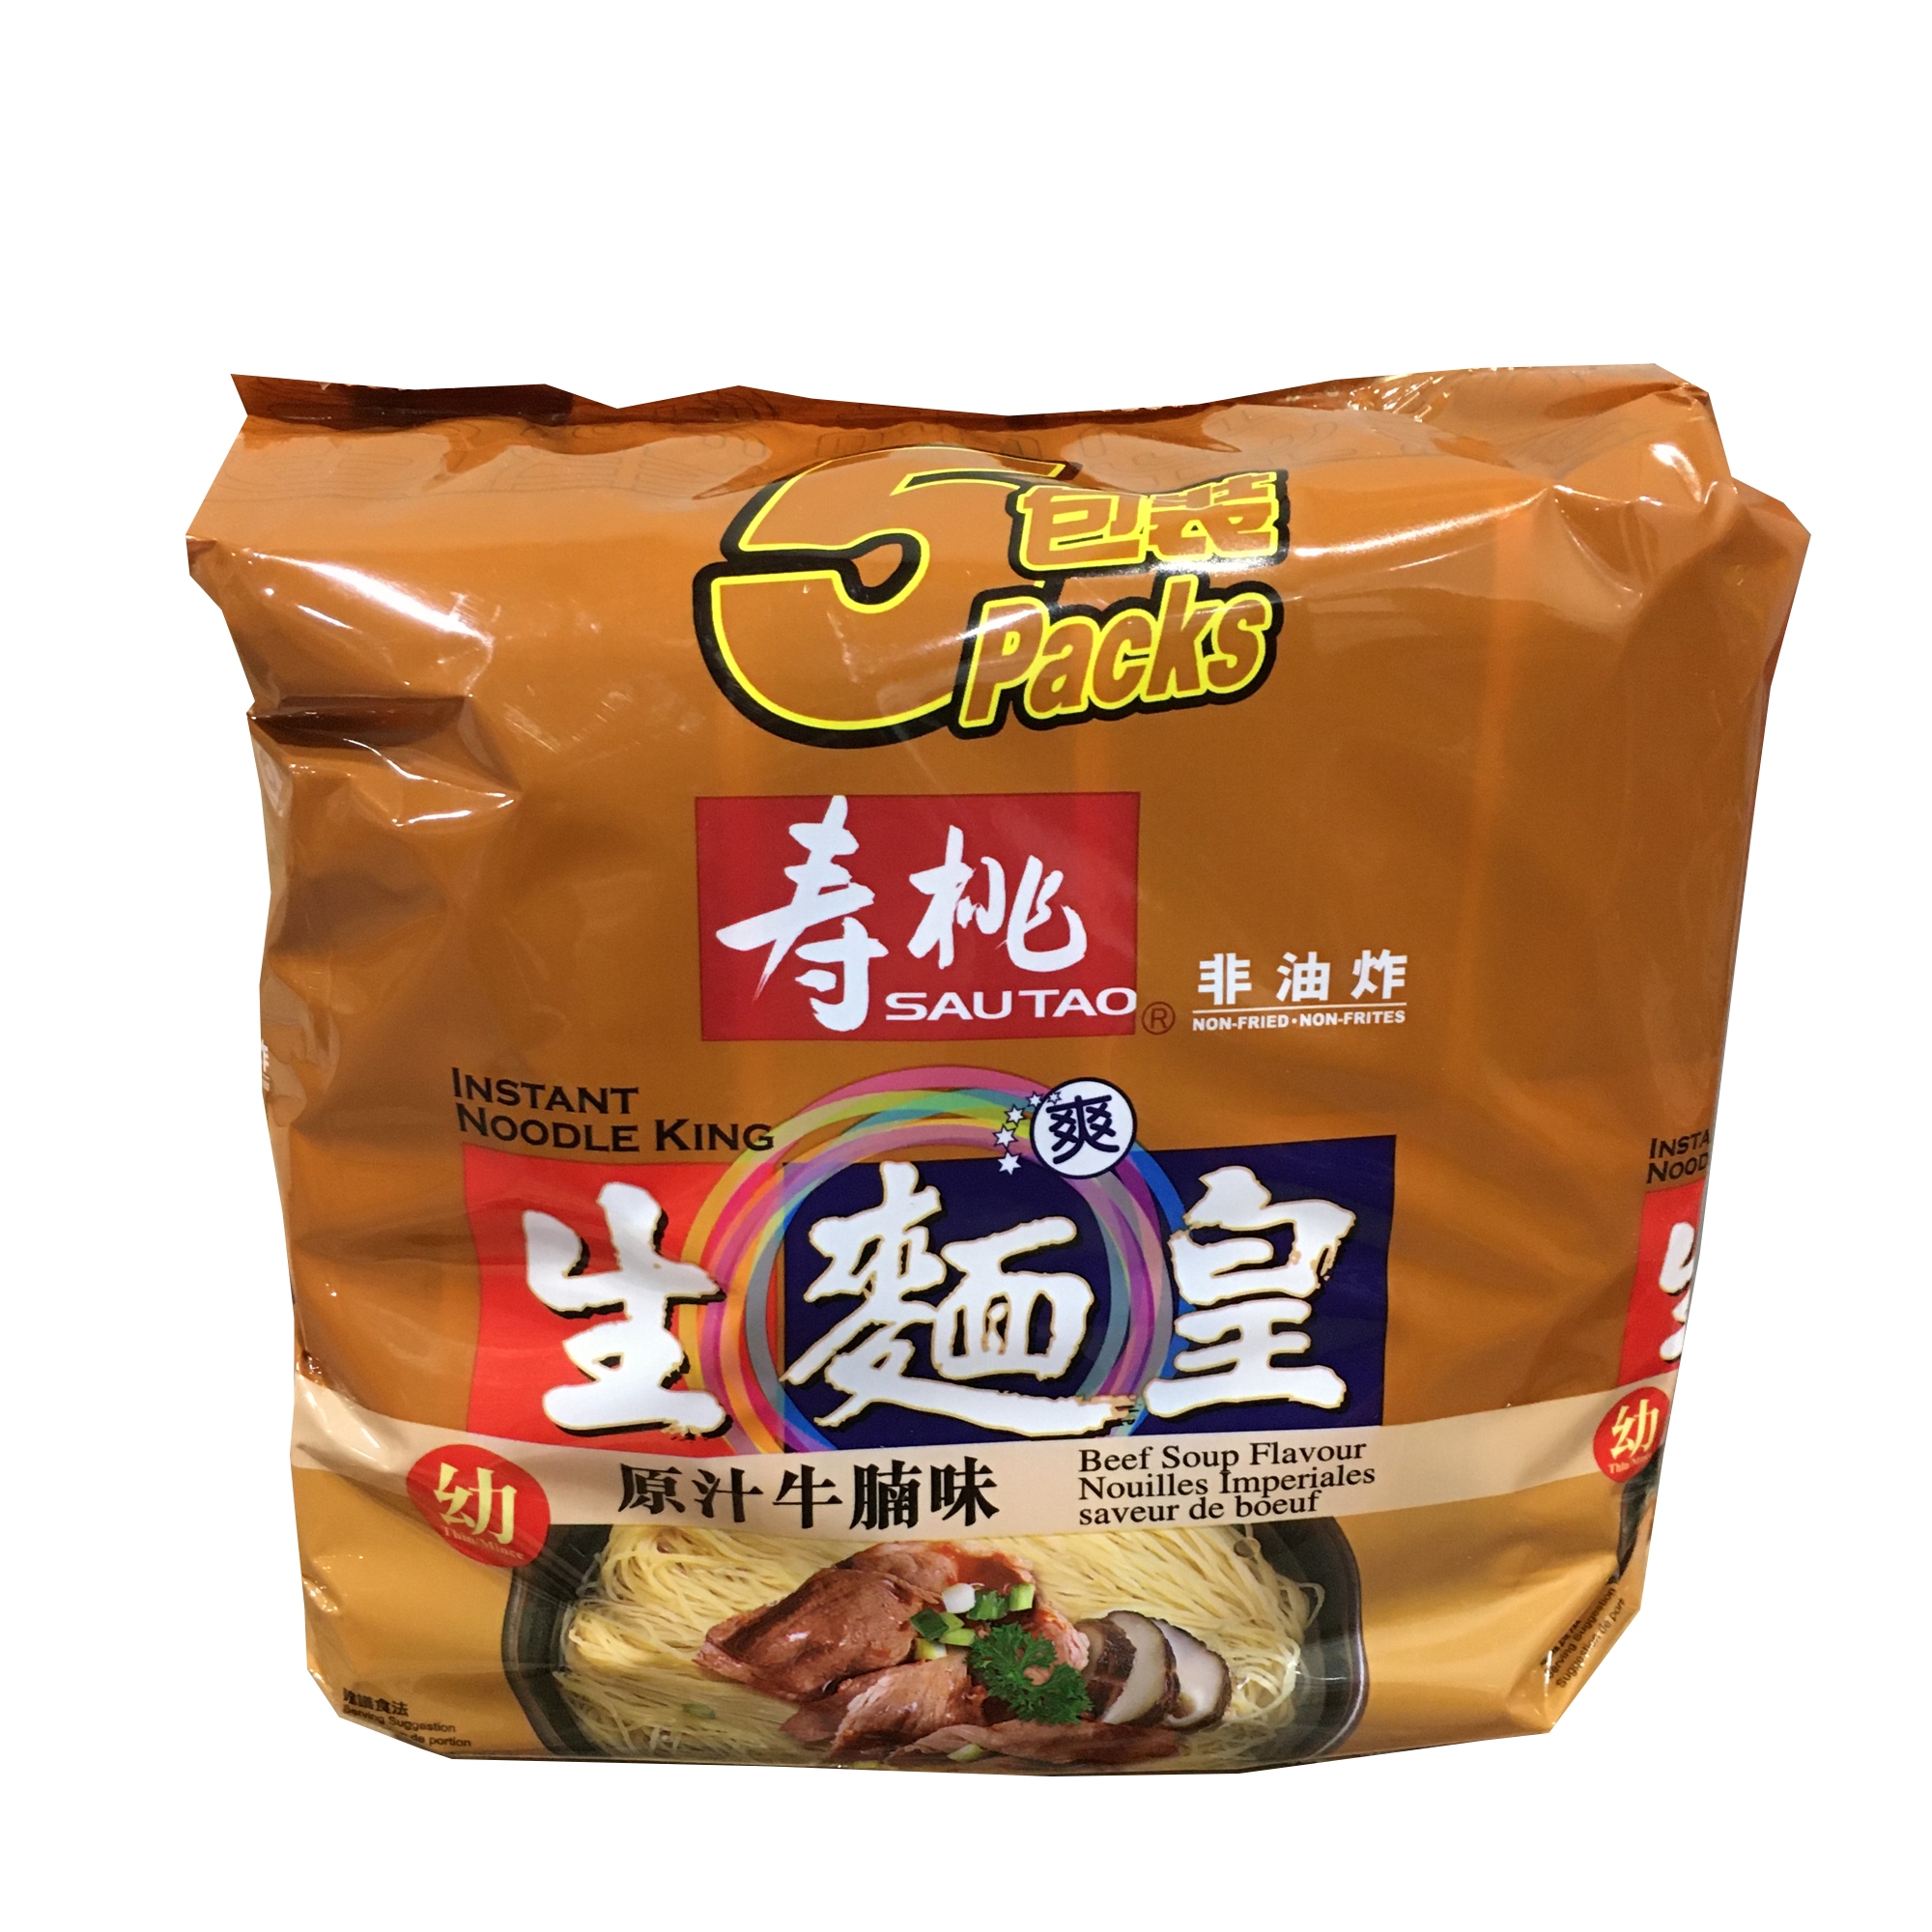 ST 5-PKT BEEF NOODLE KING ND137025